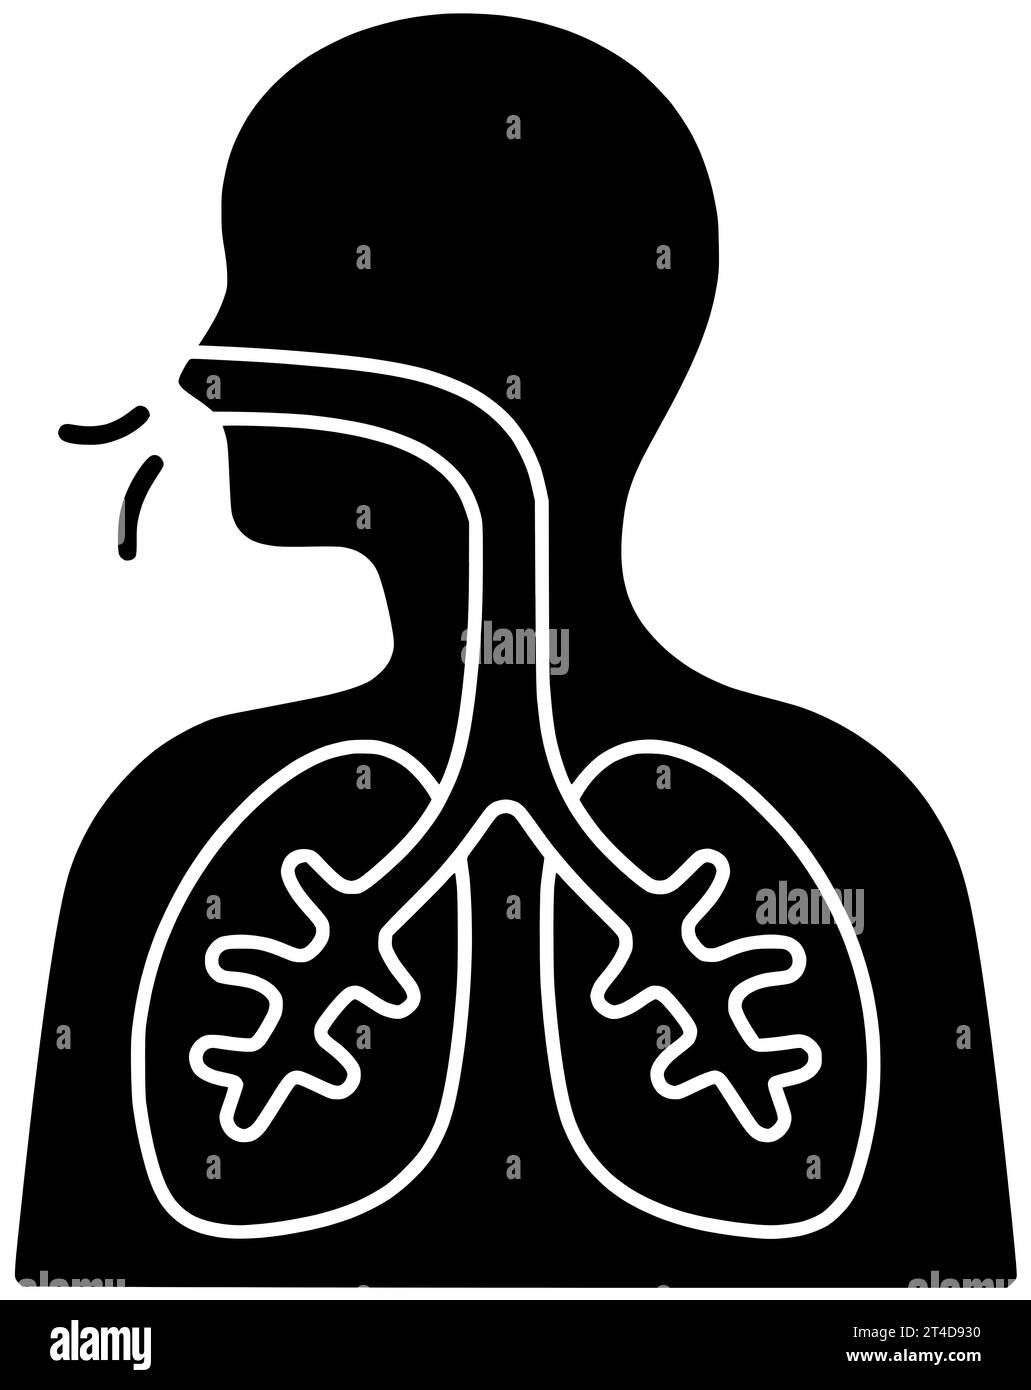 disease black pneumonia silhouette respiratory illustration pulmonary icon virus logo lung asthma care health cancer infection copd bronchitis tuberculosis medical Stock Photo